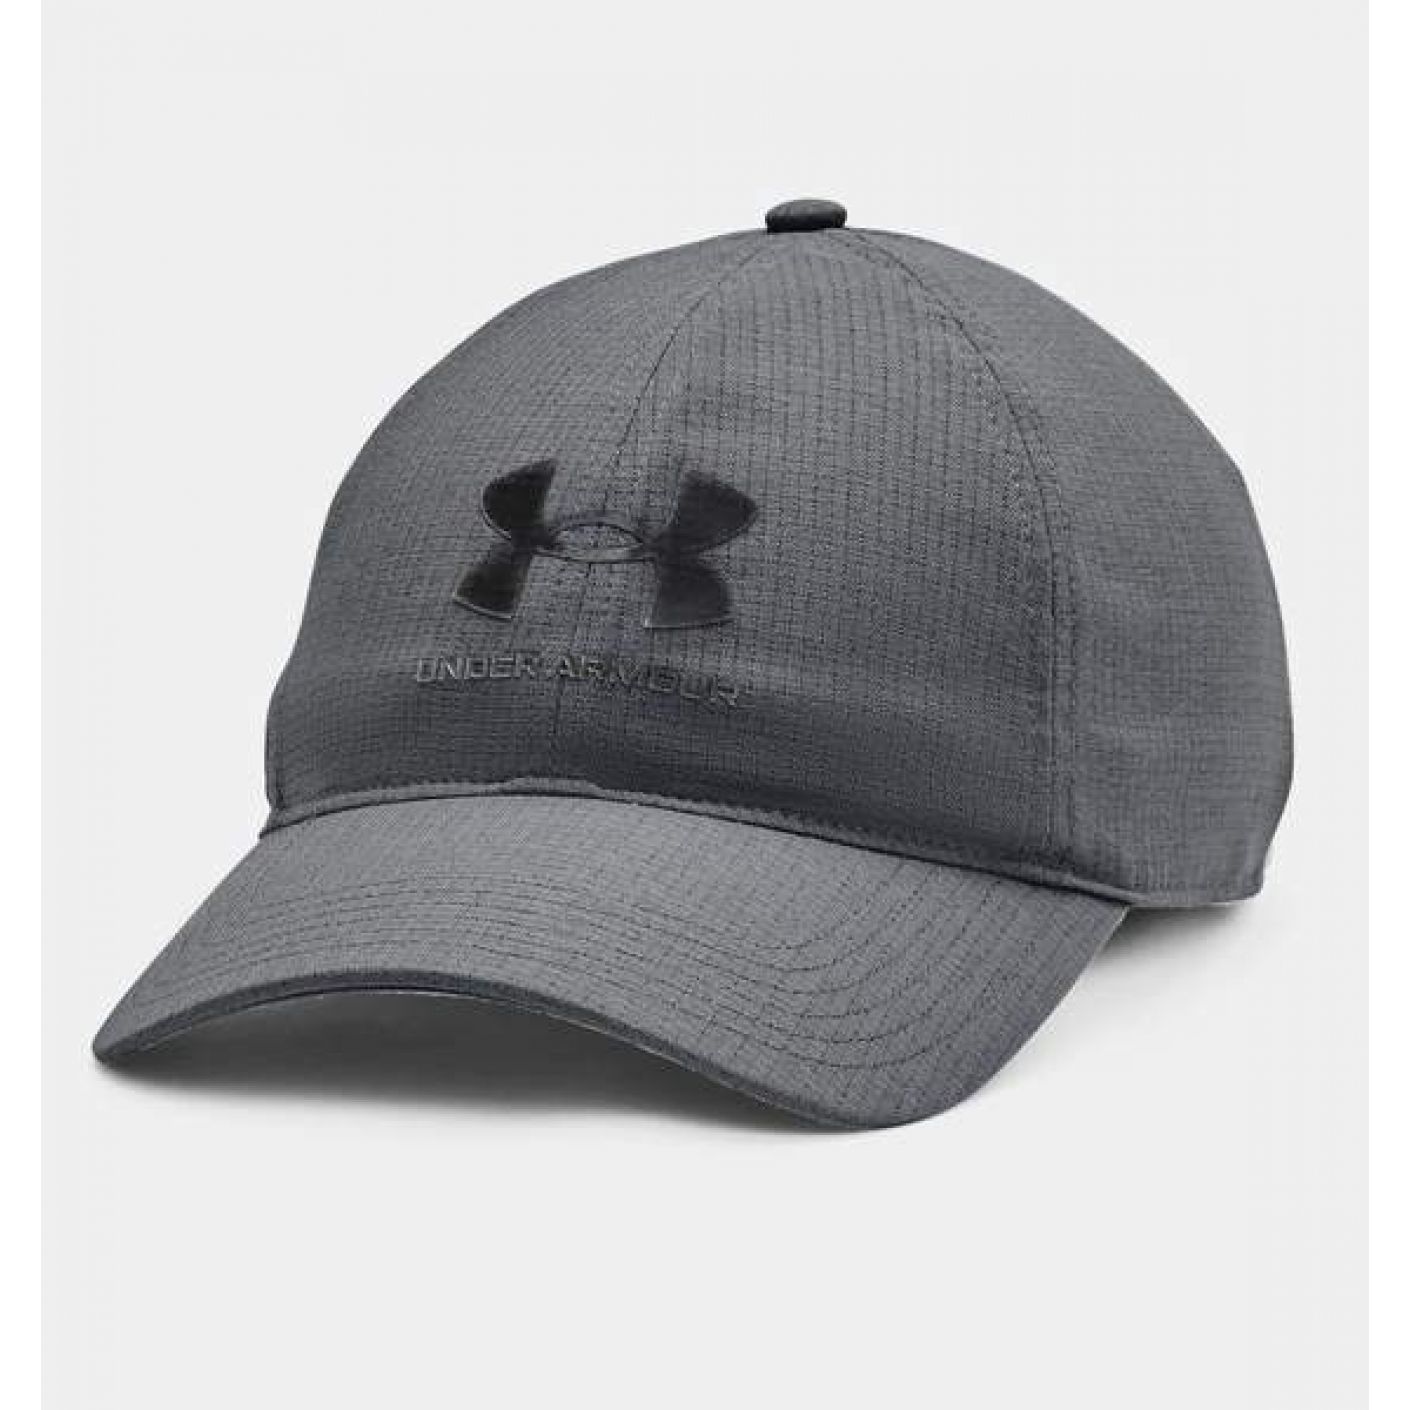 Under Armour Isochill Armourvent Adjustable Grey